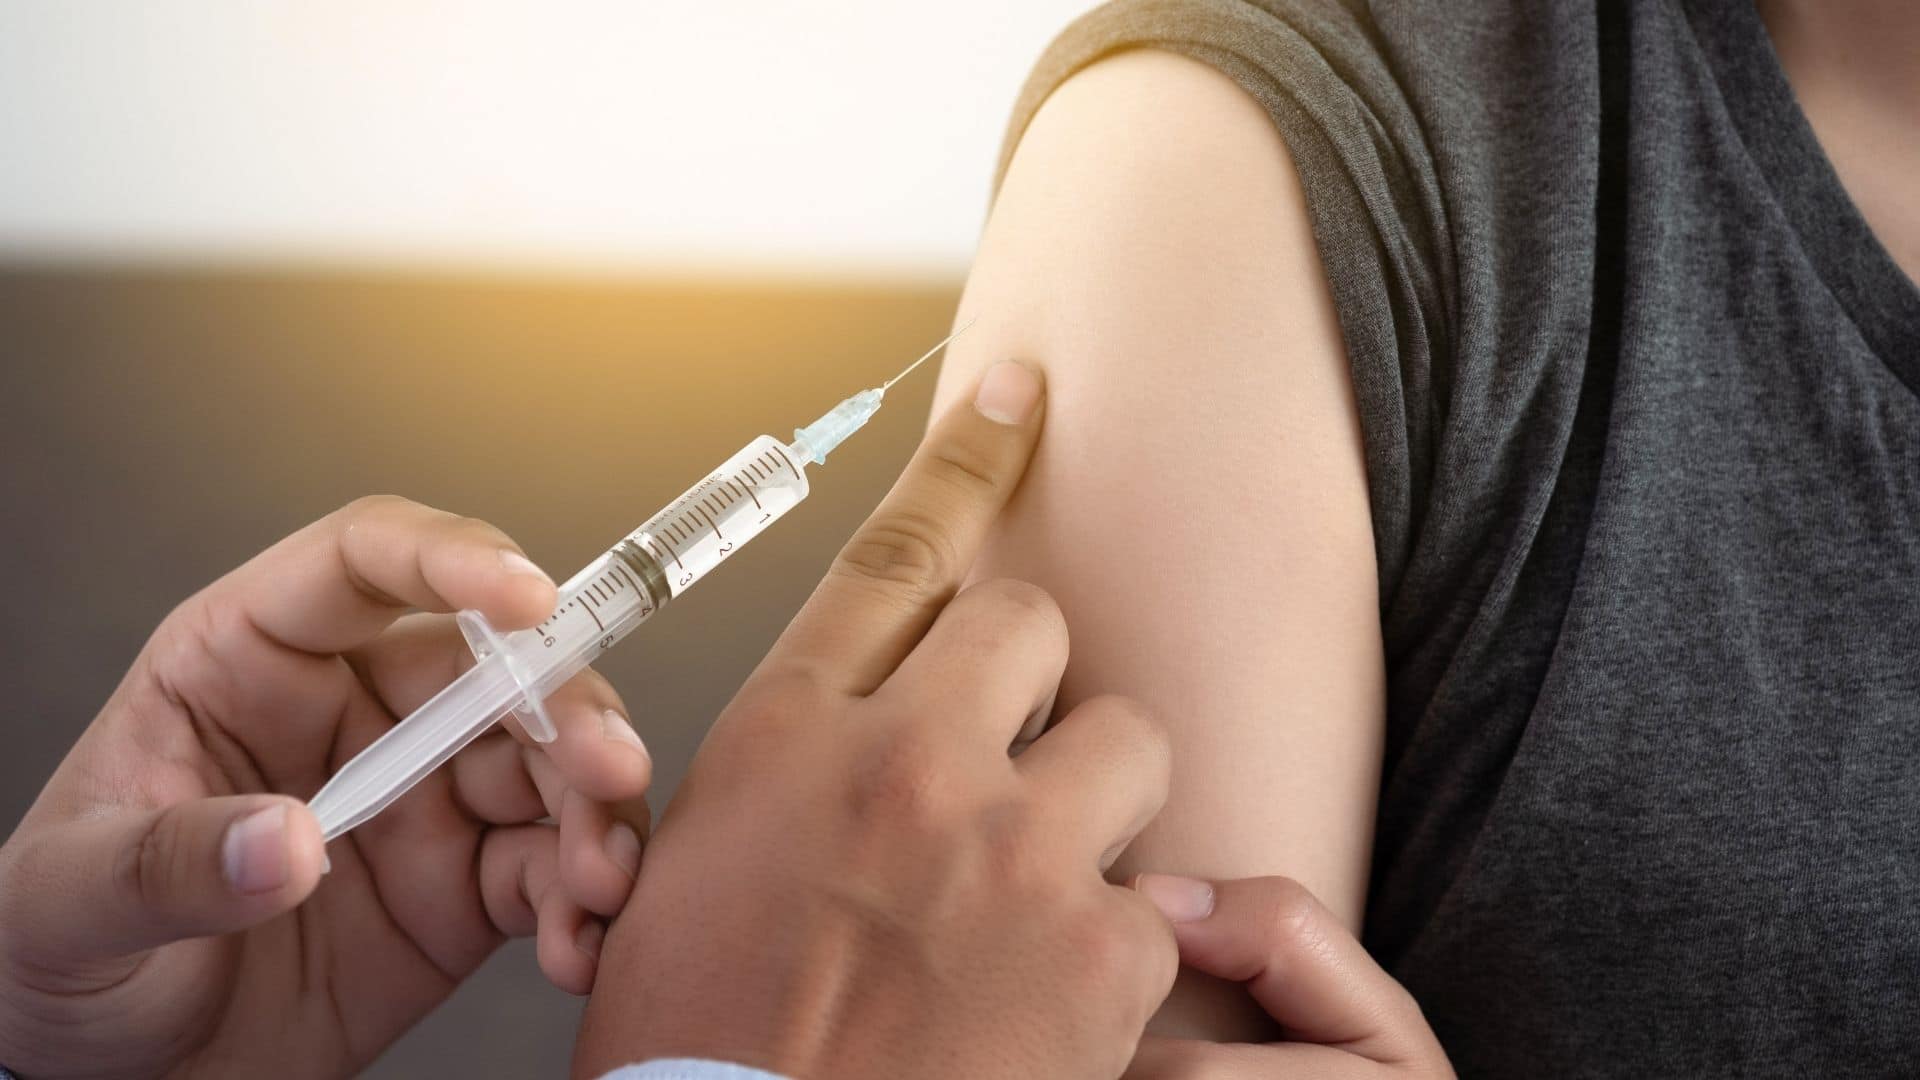 vaccination needle going into arm